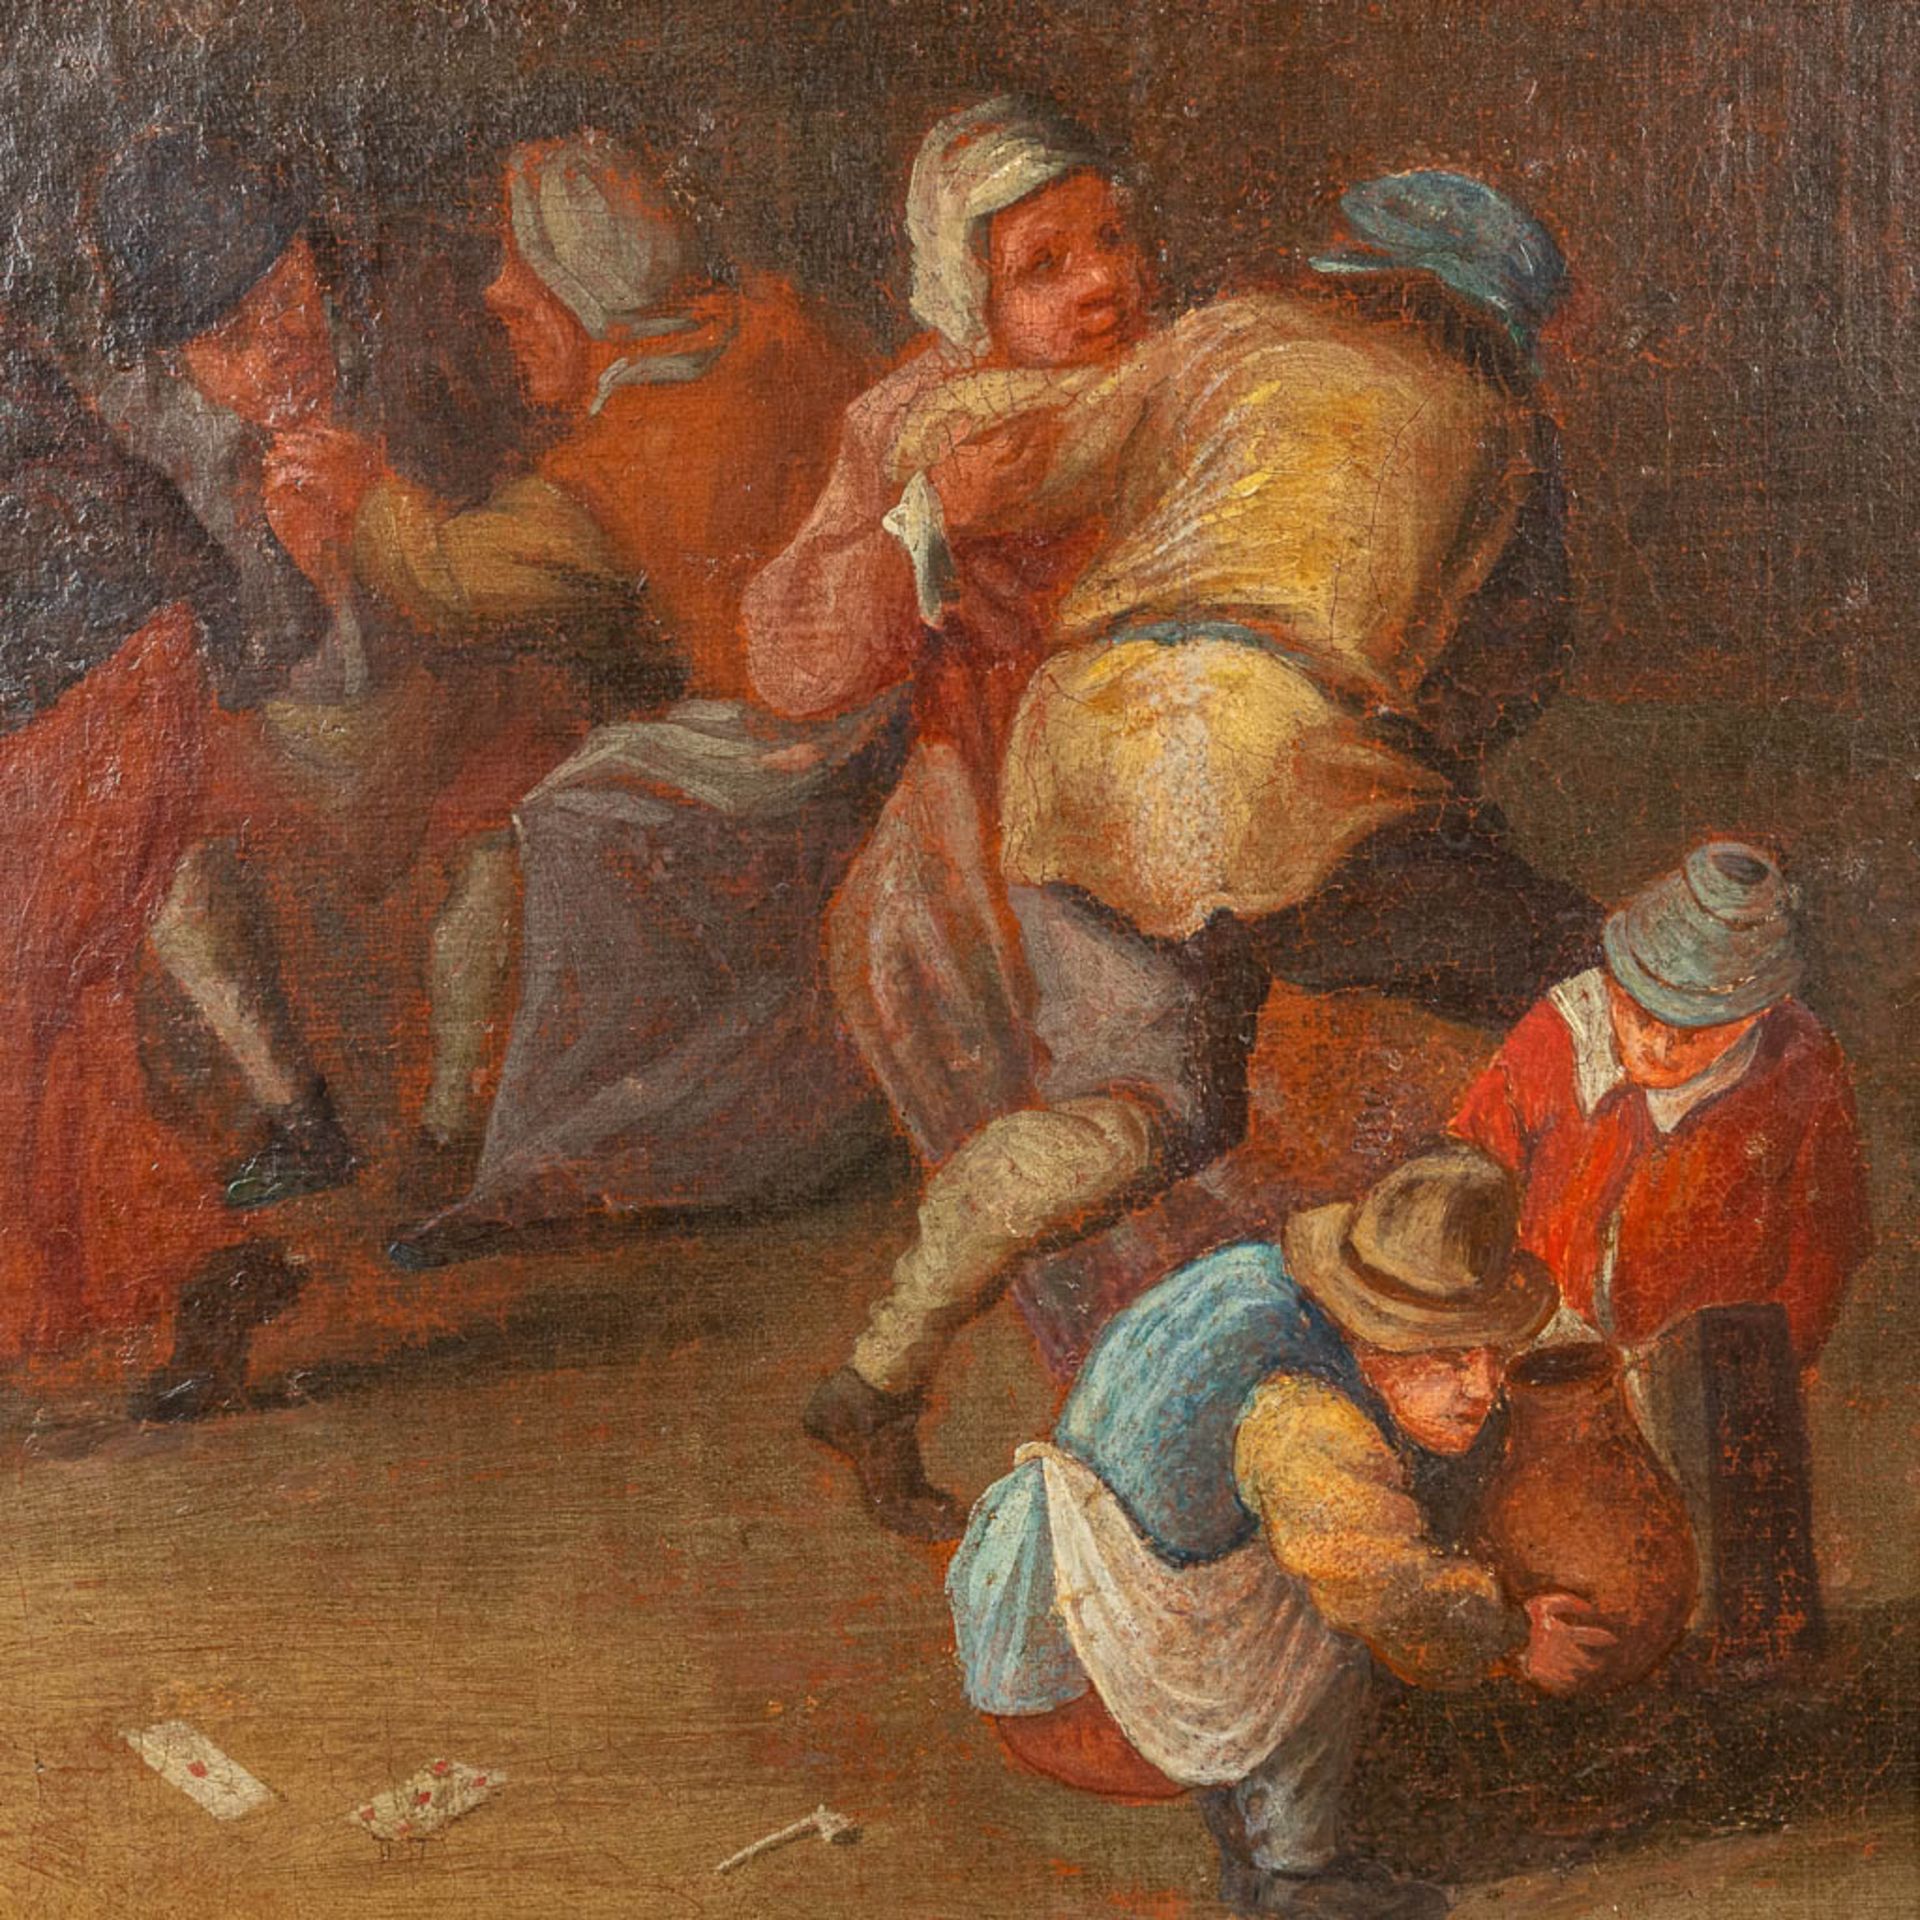 No signature found, a painting 'The Tavern' after Adriaen Brouwer, oil on canvas. (W: 66 x H: 50 cm) - Image 4 of 6